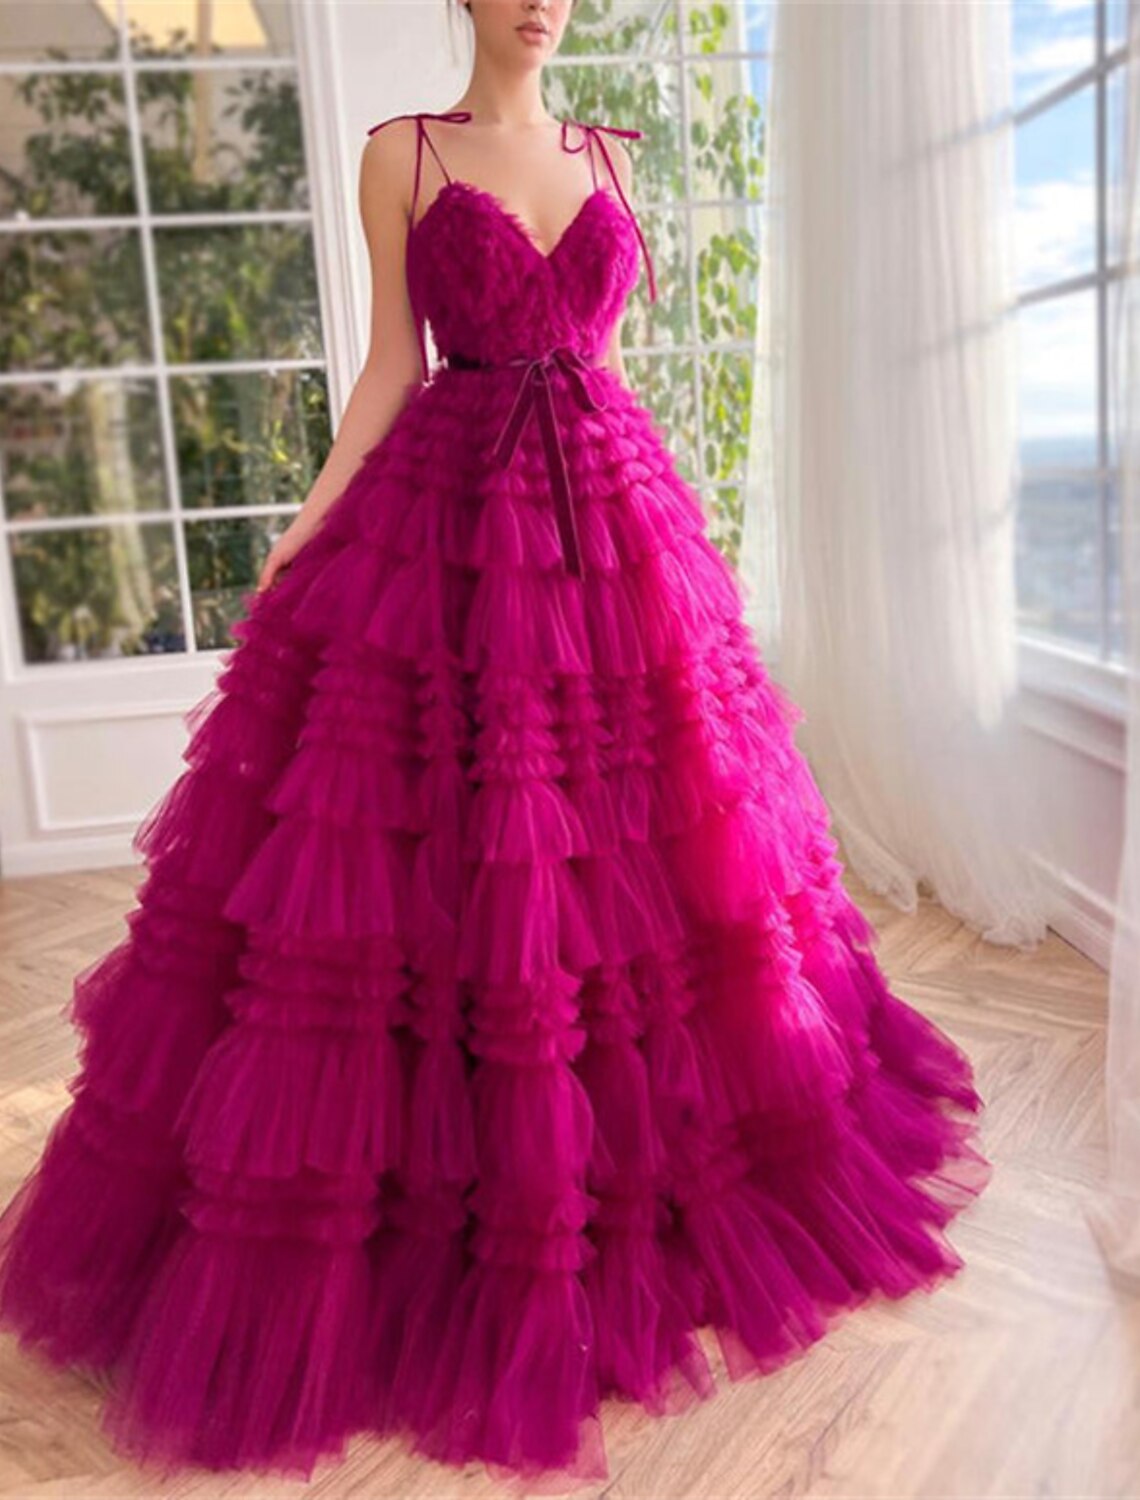 Ball Gown Evening Gown Puffy Dress Wedding Party Birthday Floor Length Sleeveless Spaghetti Strap Tulle with Ruffles Strappy